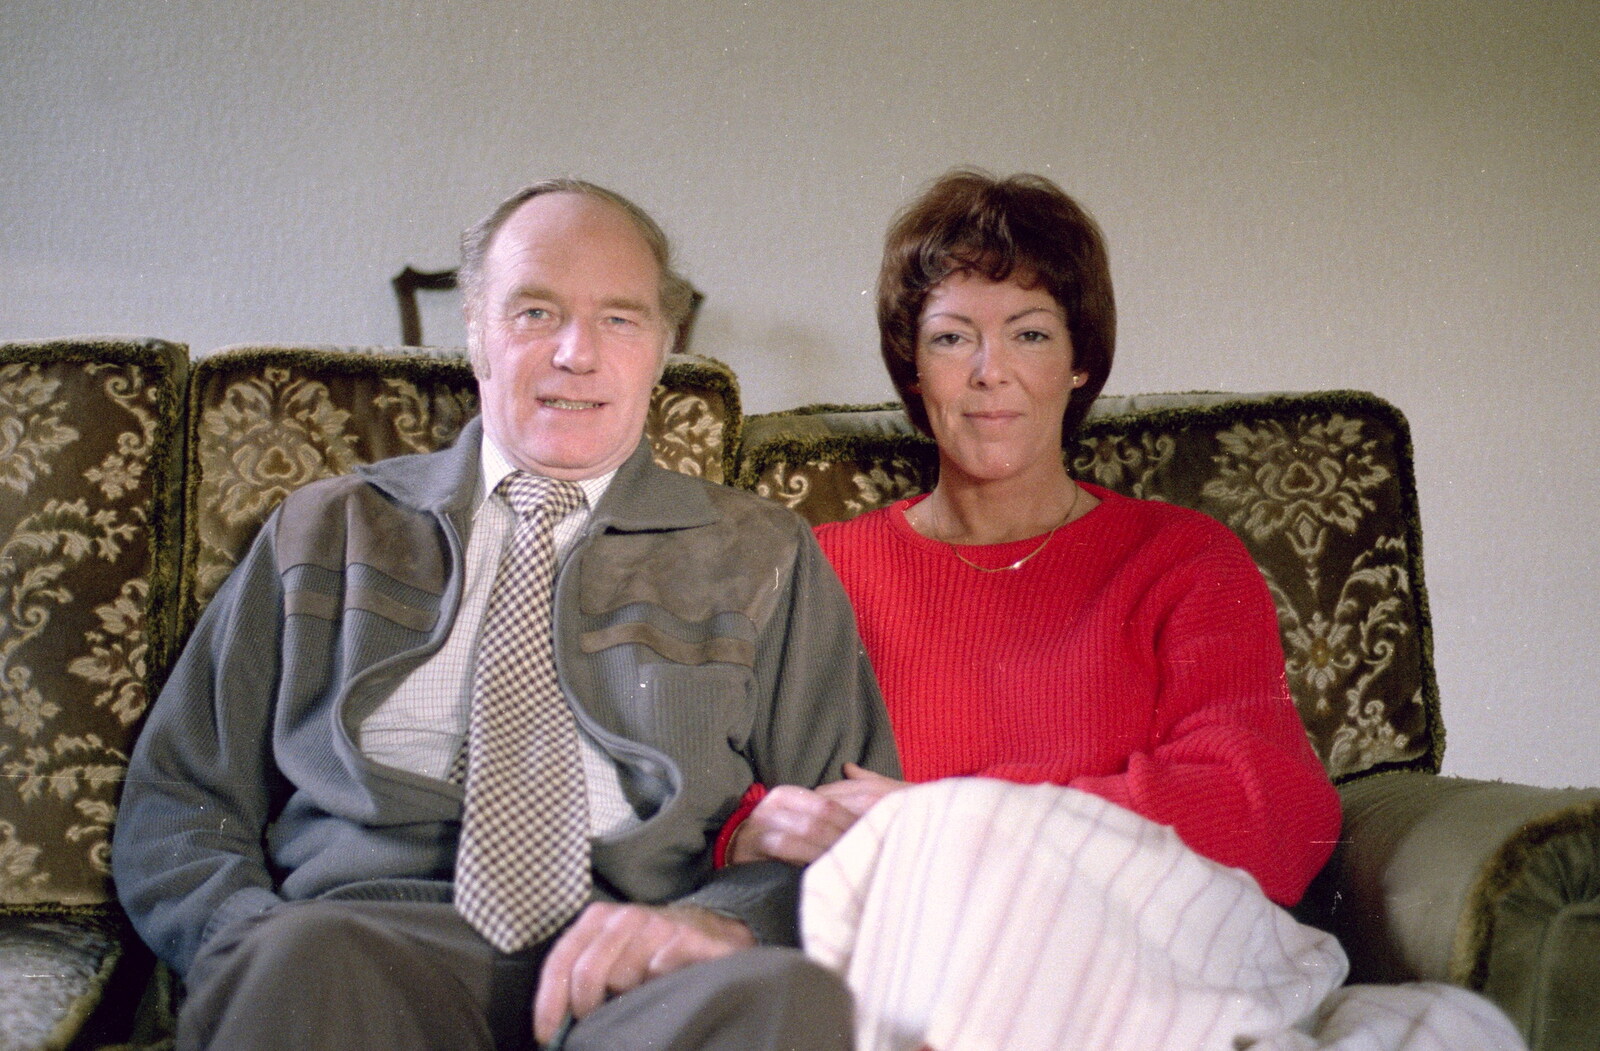 Dad and Maureen from Christmas in Macclesfield and Wetherby, Cheshire  and Yorkshire - 25th December 1985